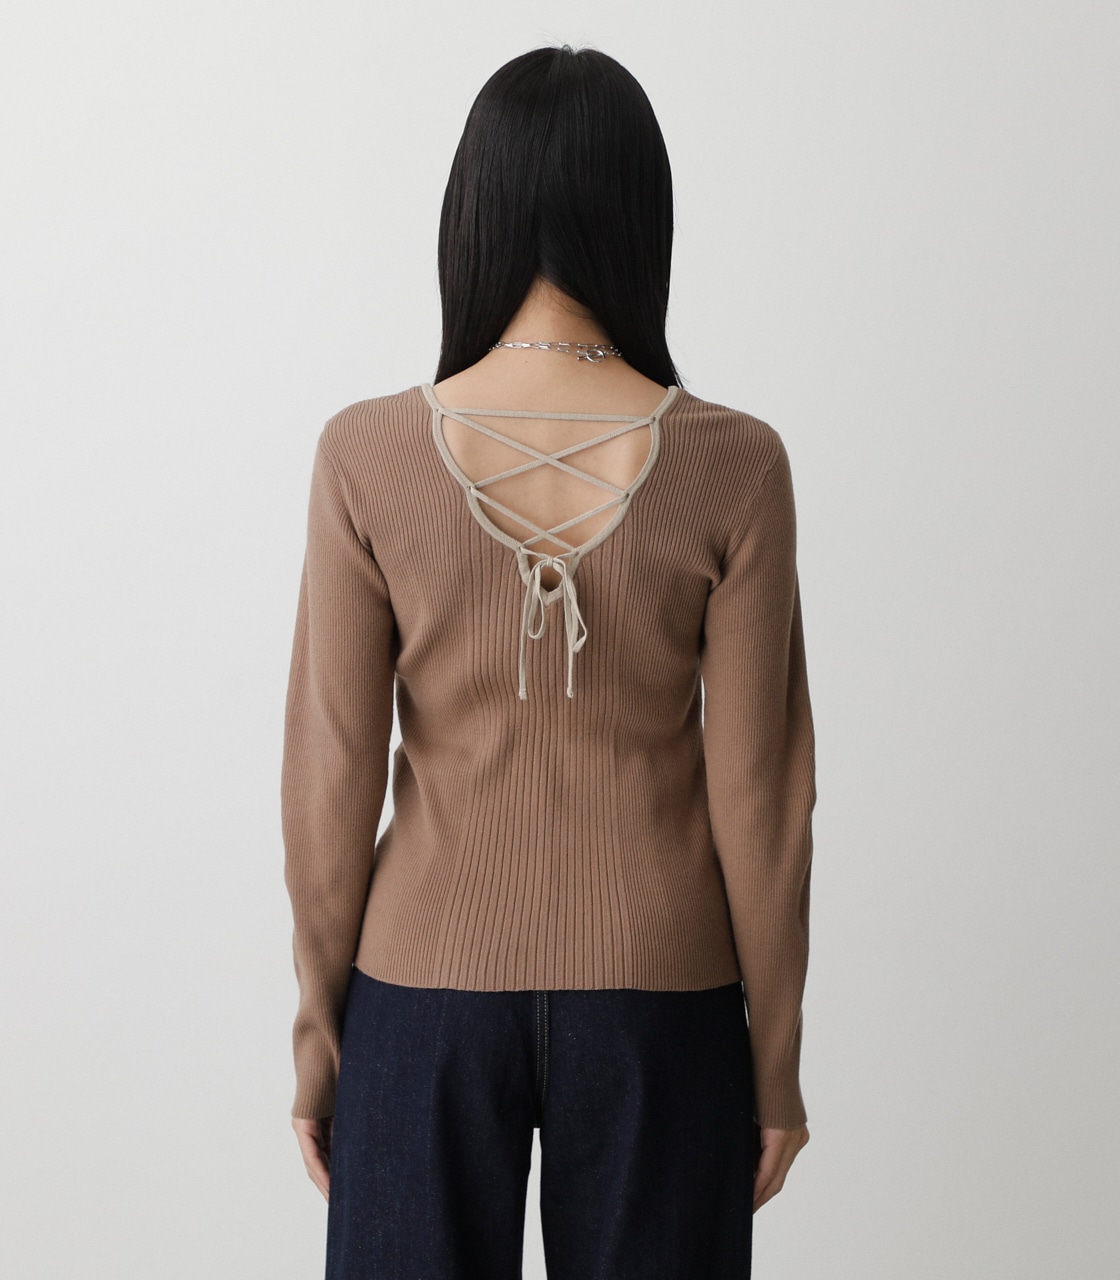 BACK LACE-UP KNIT TOPS/バックレースアップニットトップス 詳細画像 L/BRN 7